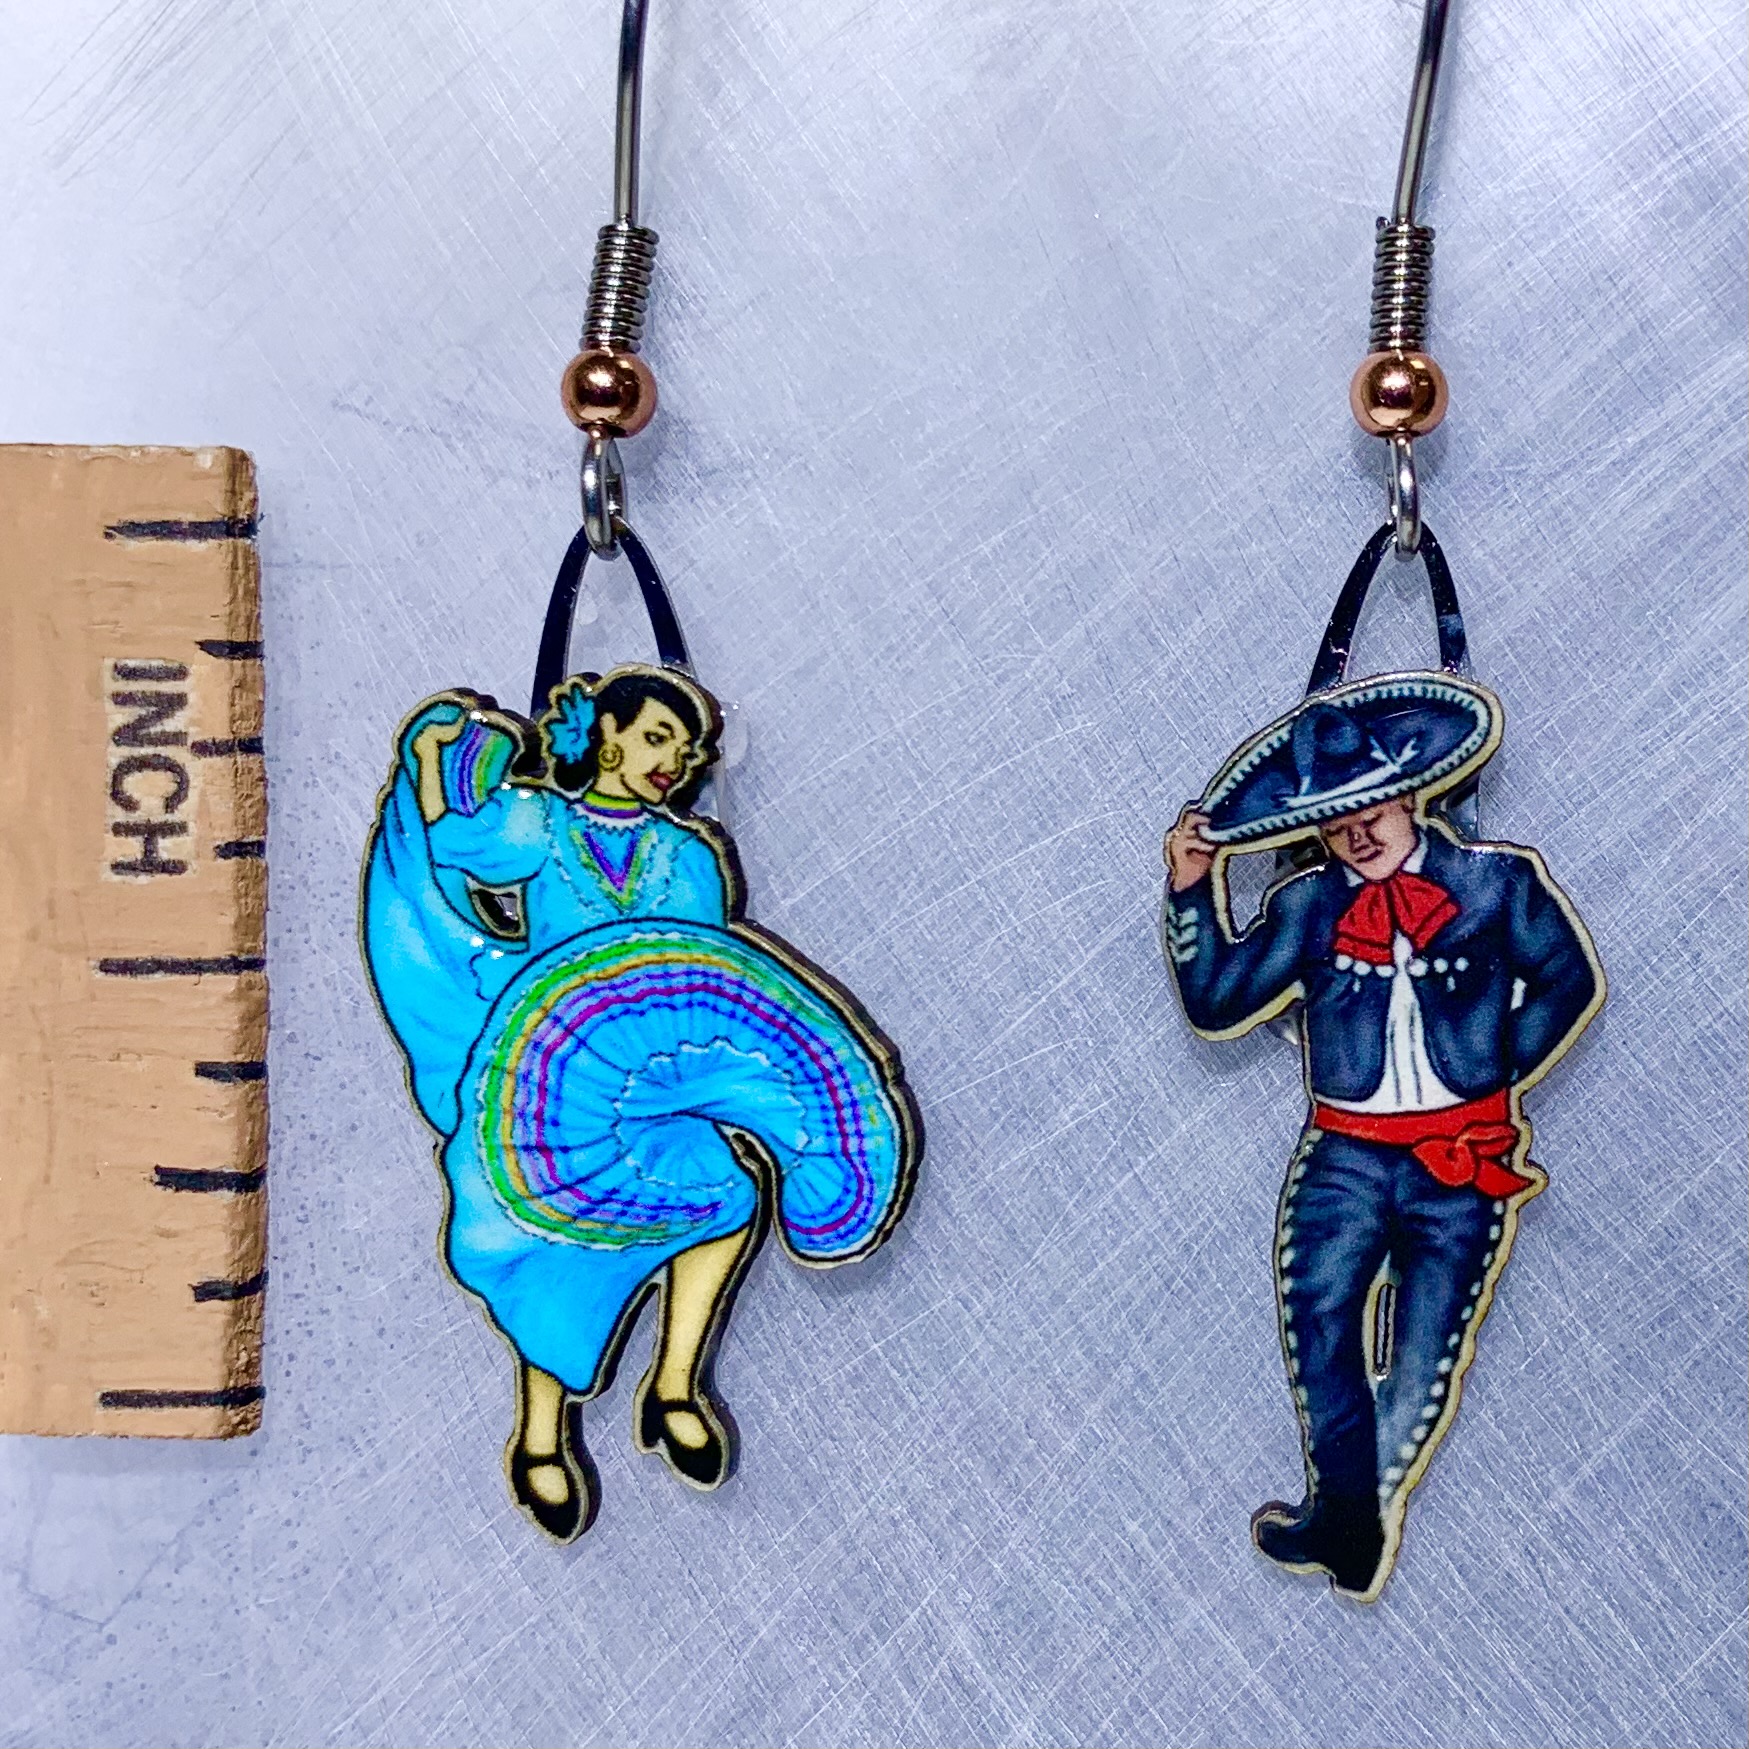 Picture shown is of 1 inch tall pair of earrings of Turquoise Folklorico.